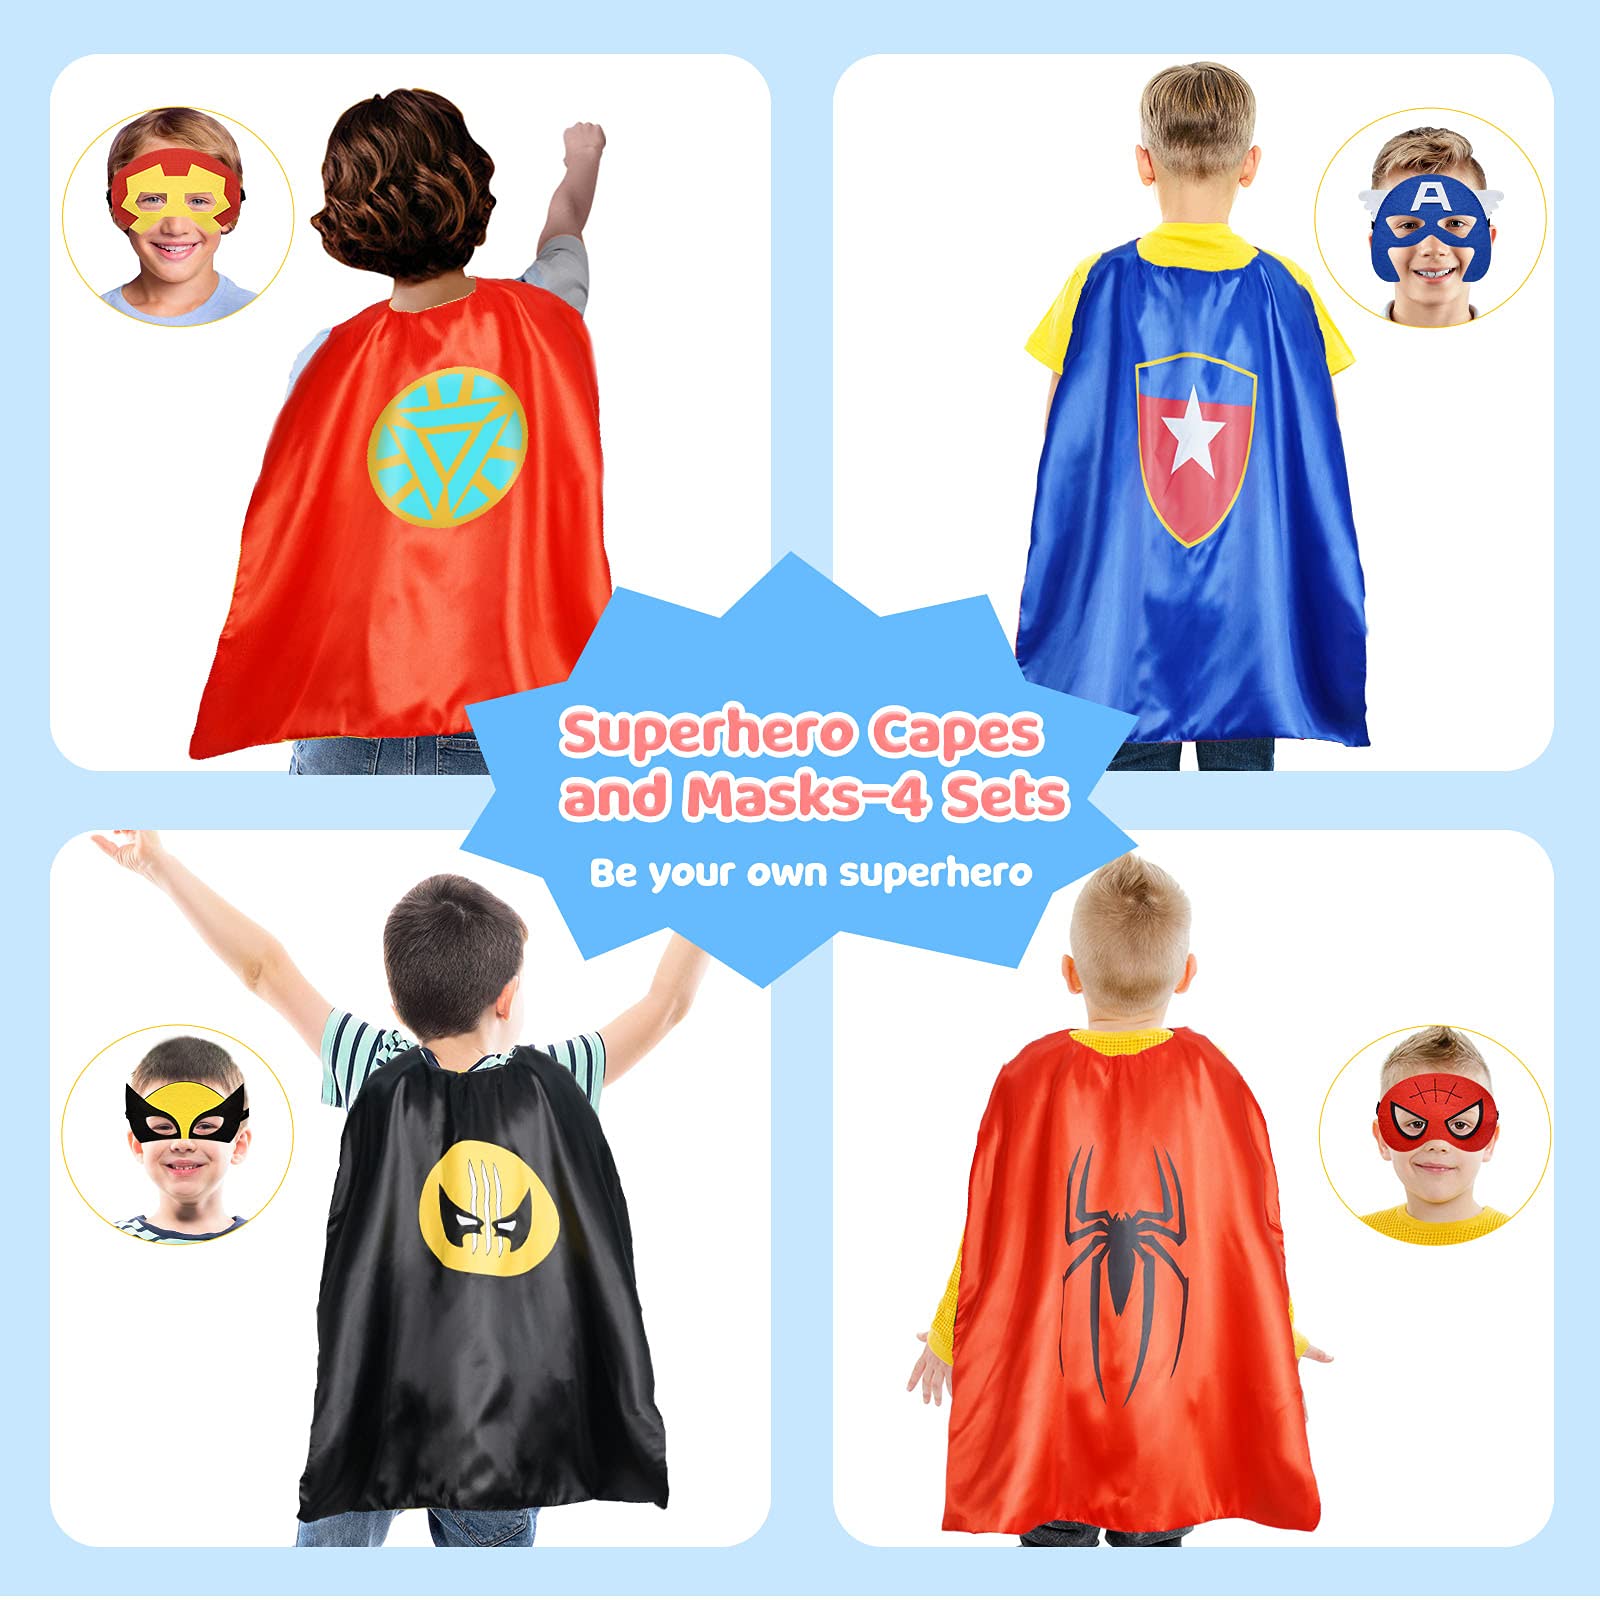 Roko Superhero Capes for Kids Cool Halloween Costume Cosplay Festival Party Supplies Favors Dress Up Cloth Gifts for 3-12 Year Old Boys Girls Toys Age 3-10 Xmas Christmas Stocking Filler Stuffers